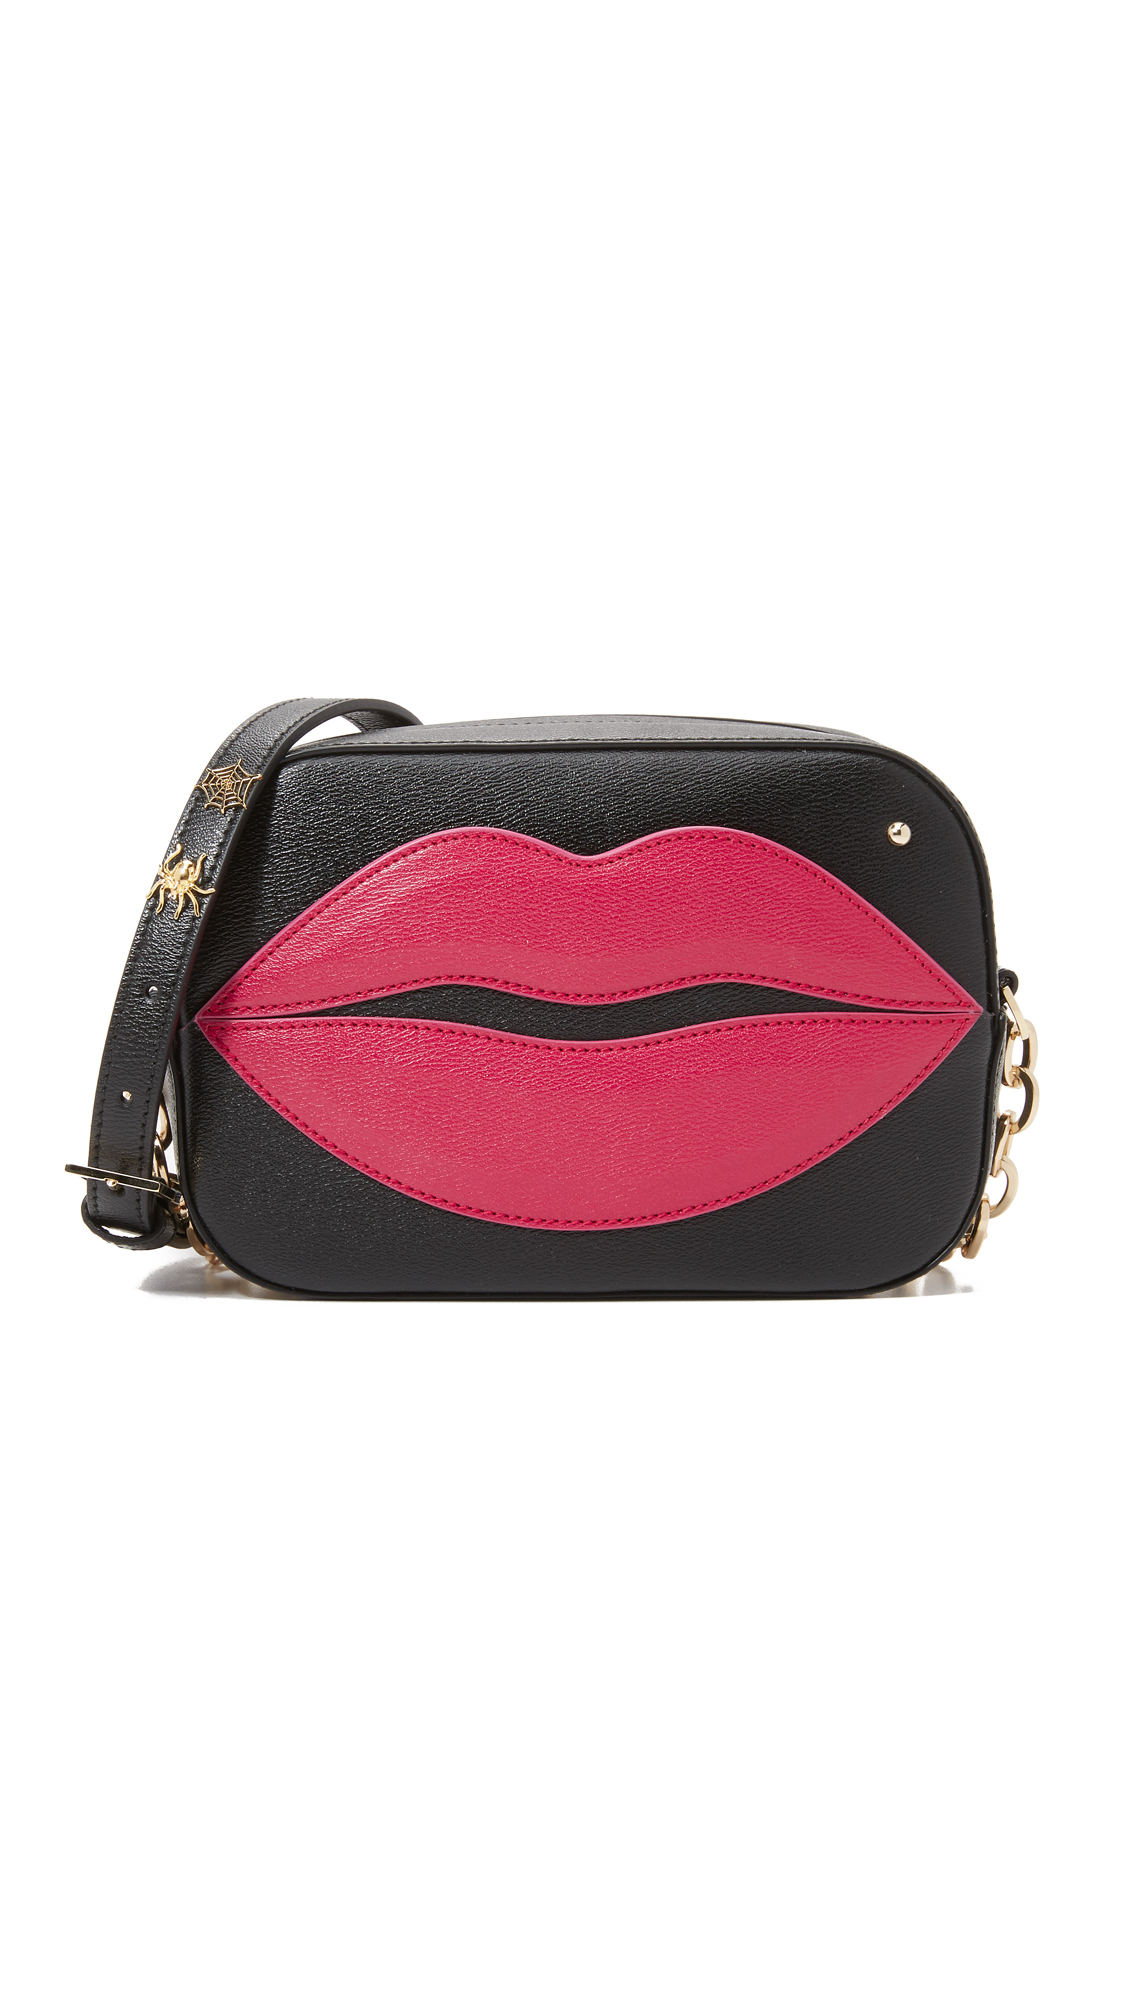 Charlotte Olympia bags. Charlotte Olympia Collection Makeup Bag.